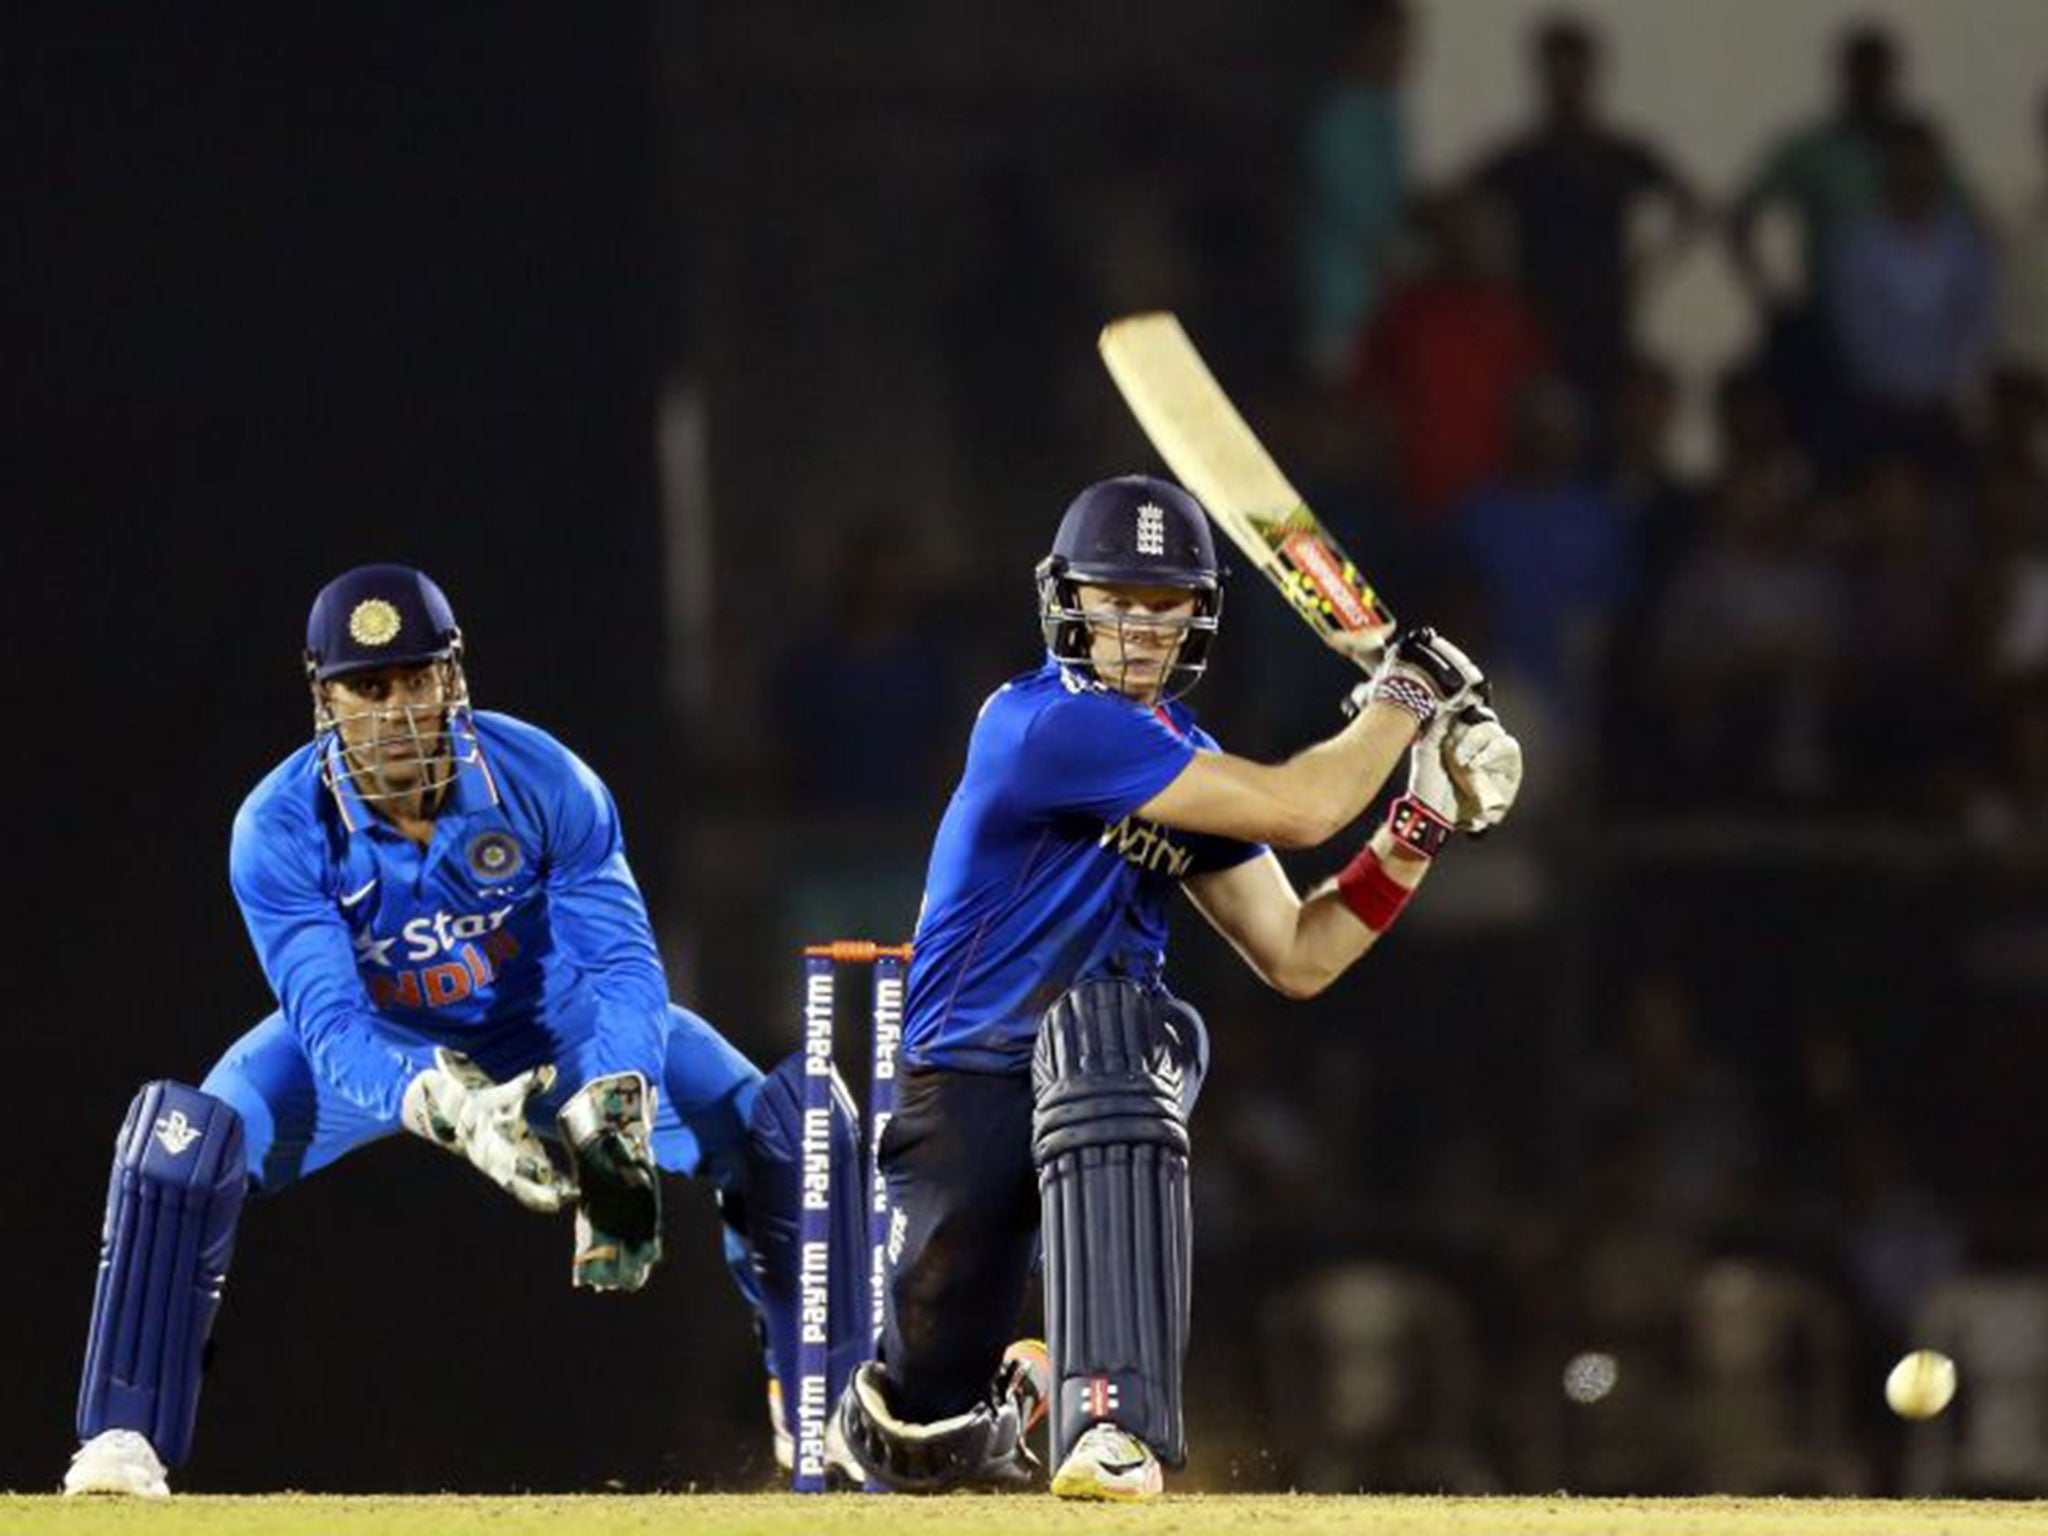 Sam Billings' 93 guided England to victory in their warm-up ODI against India